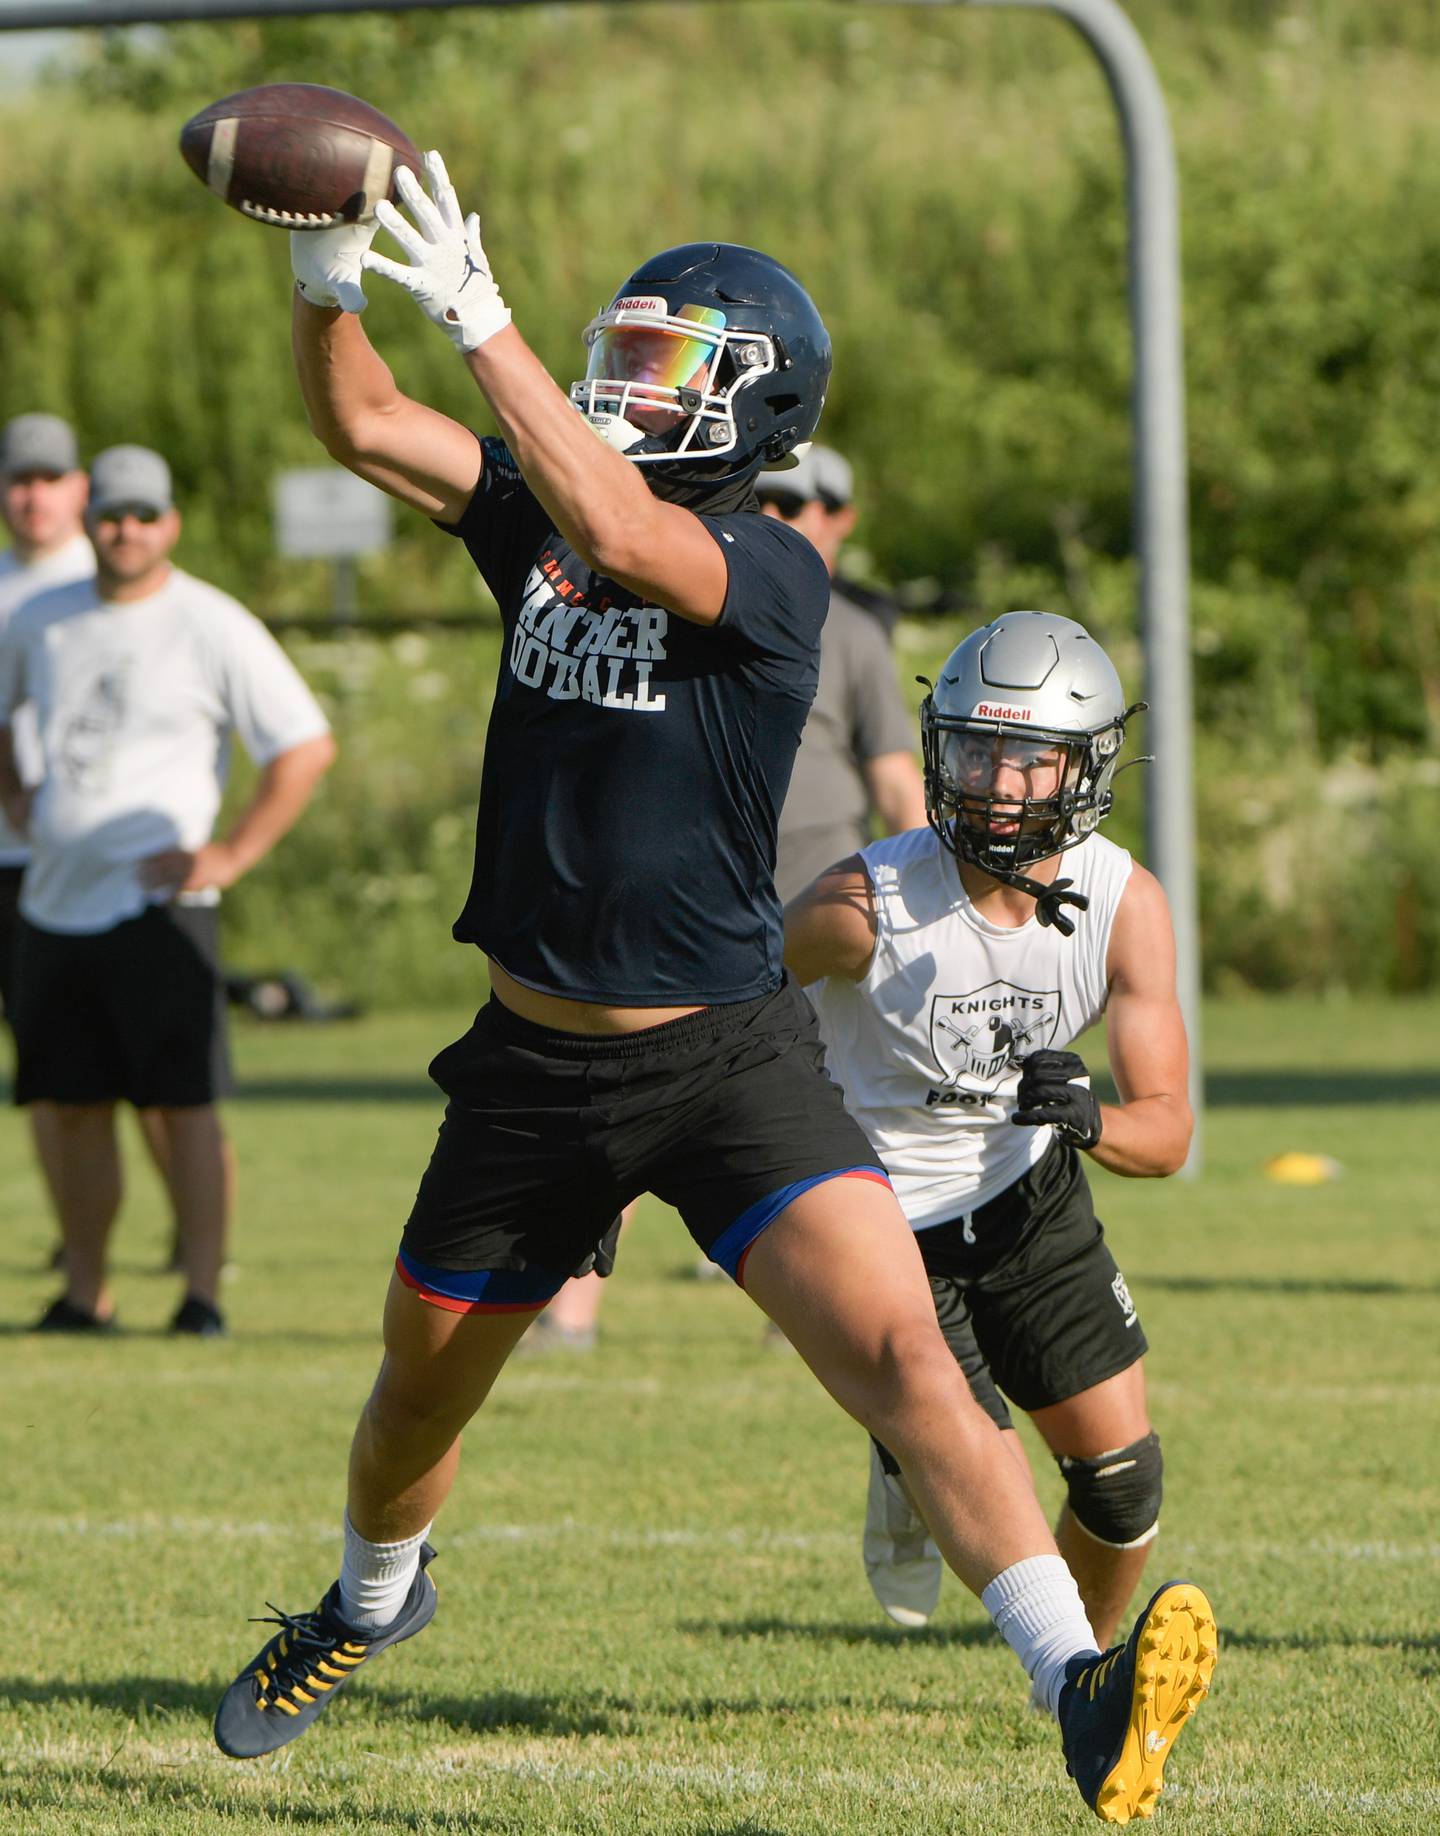 Oswego’s Deakon Tonielli catches a pass during a 7 on 7 football against Kaneland in Maple Park on Tuesday, July 12, 2022.